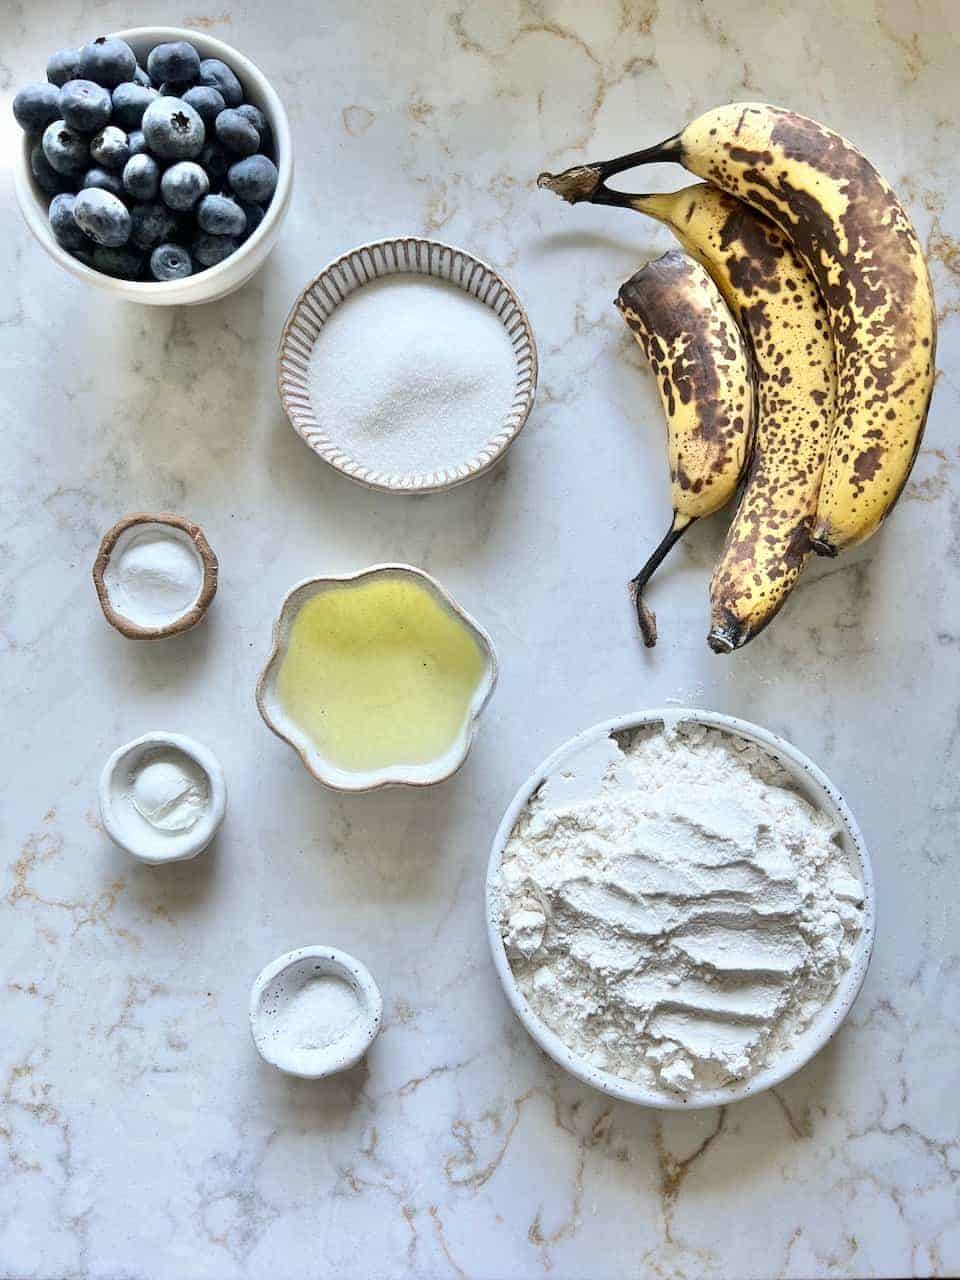 measured out ingredients for Easy Blueberry Banana Muffins against a white surface